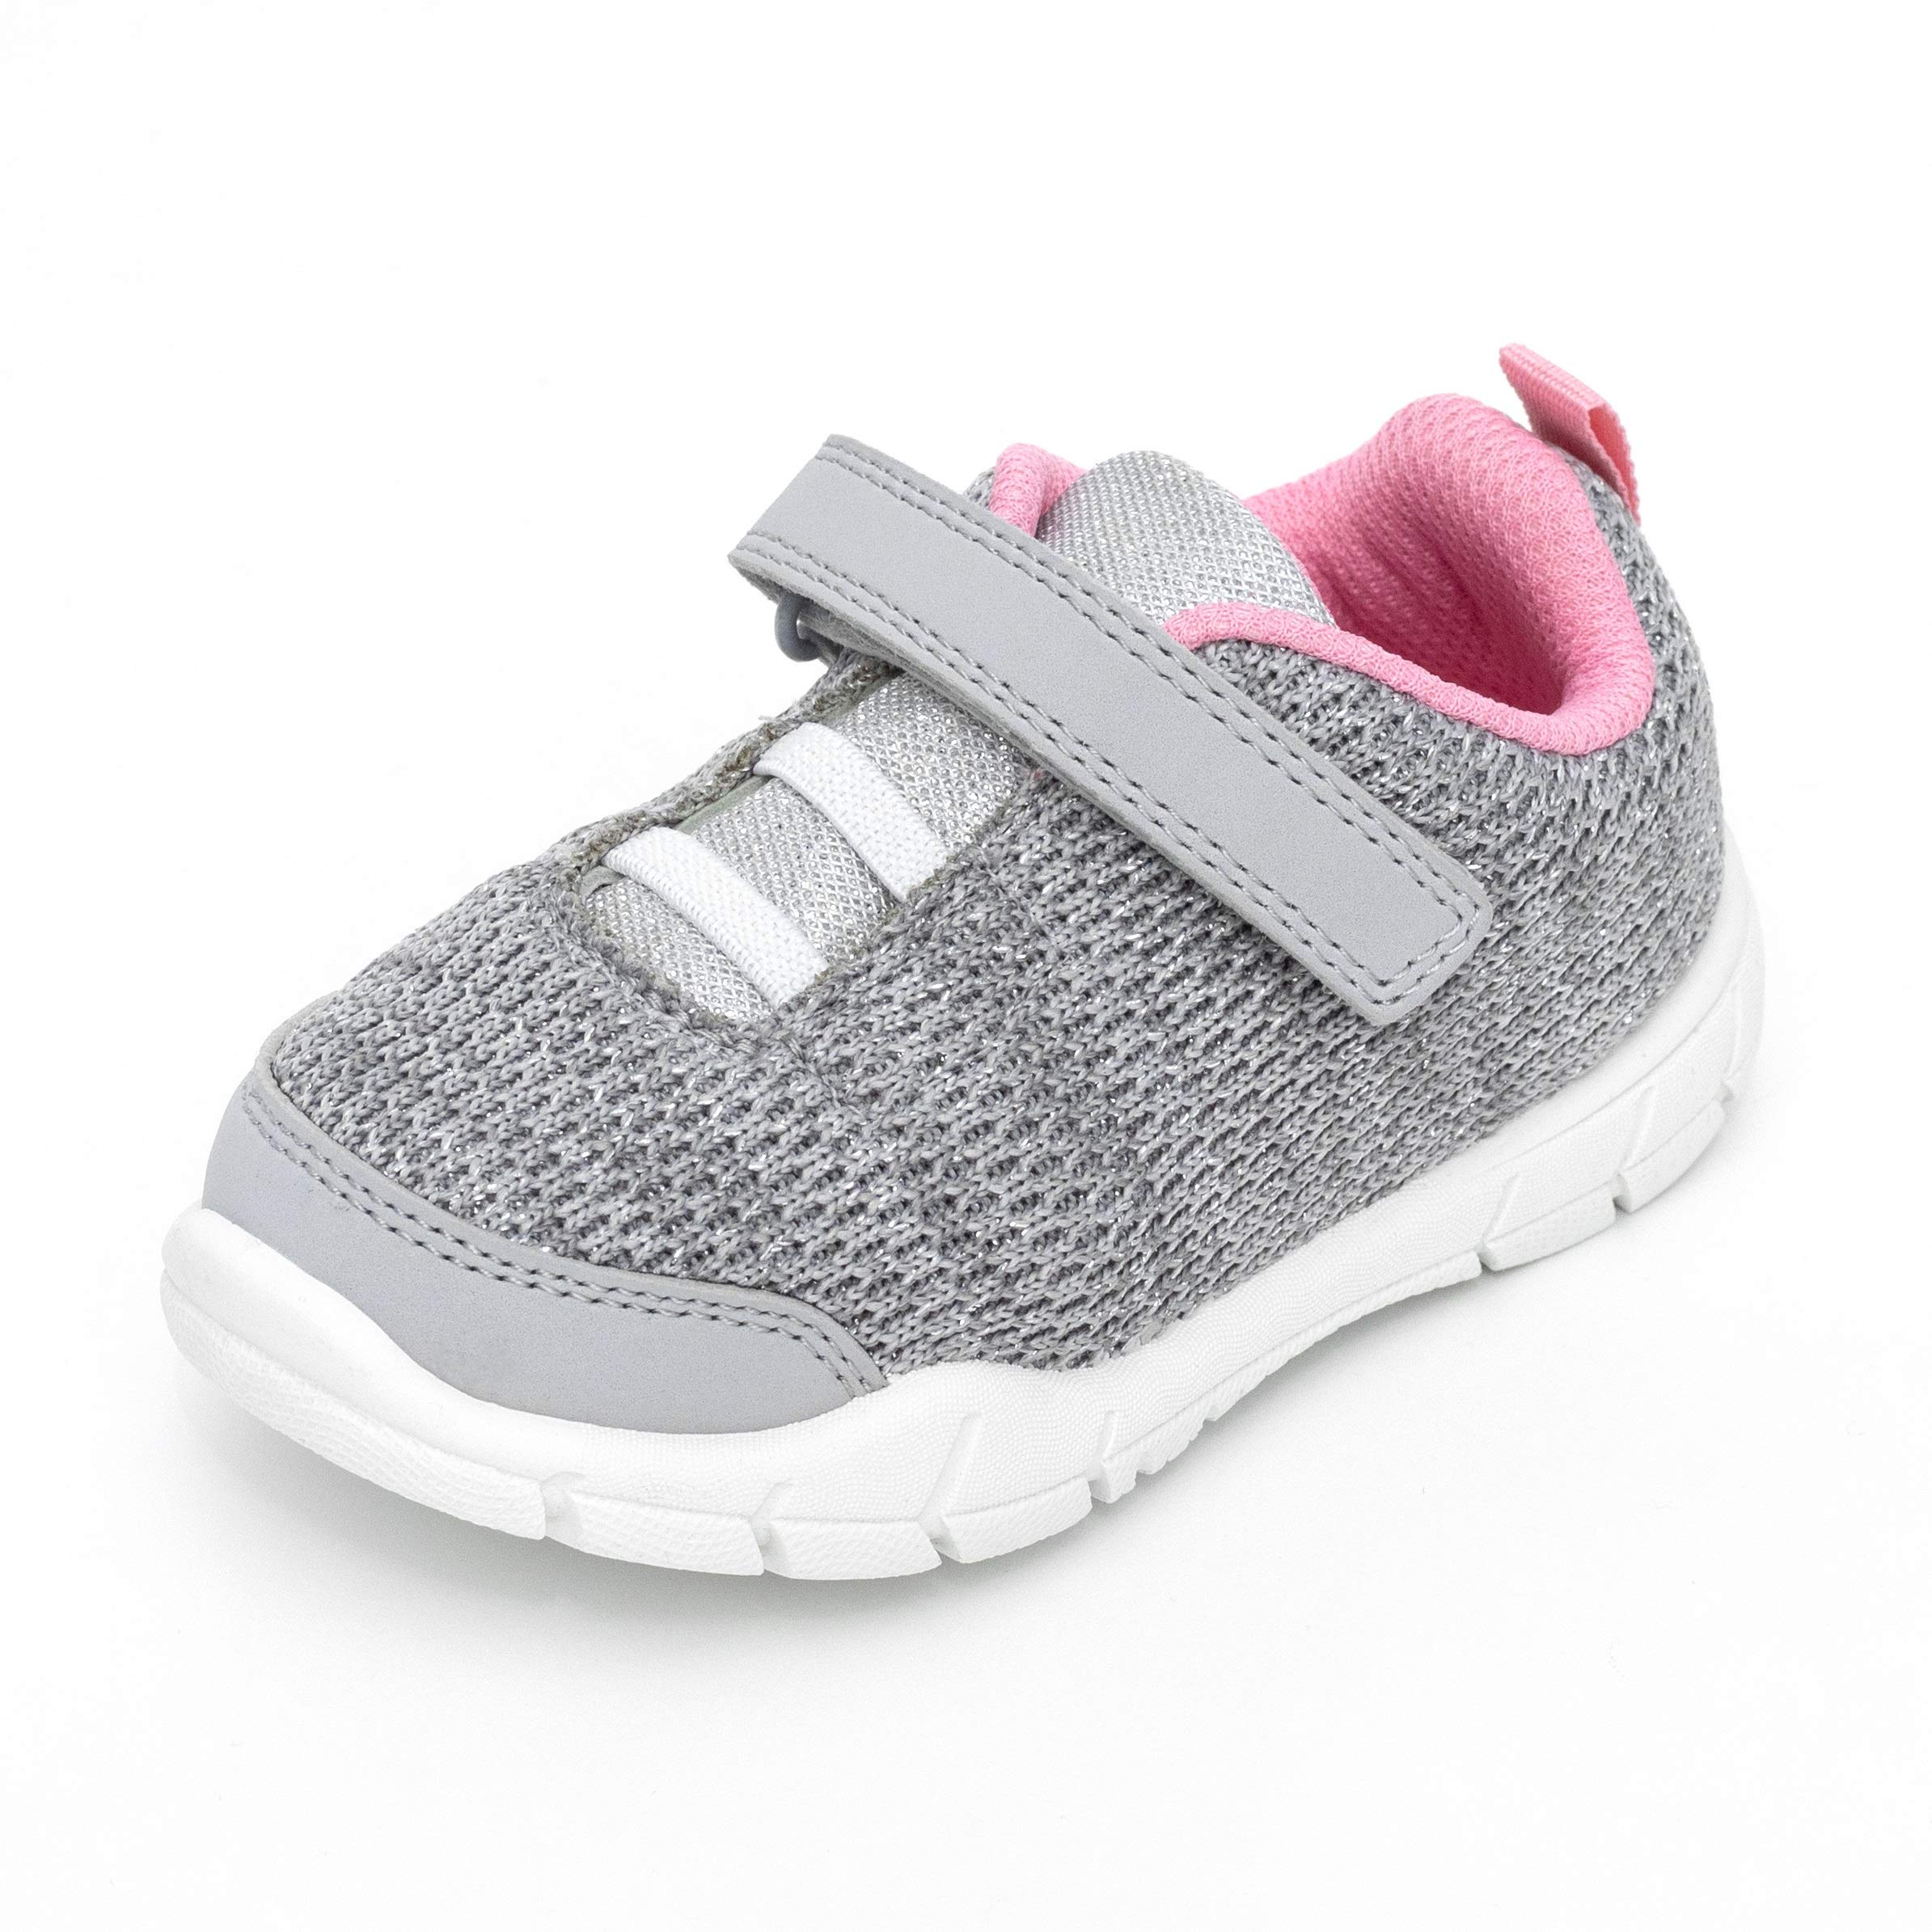 Simple Joys by Carter's Unisex Kids and Toddlers' Jordynn Knitted Athletic Sneaker